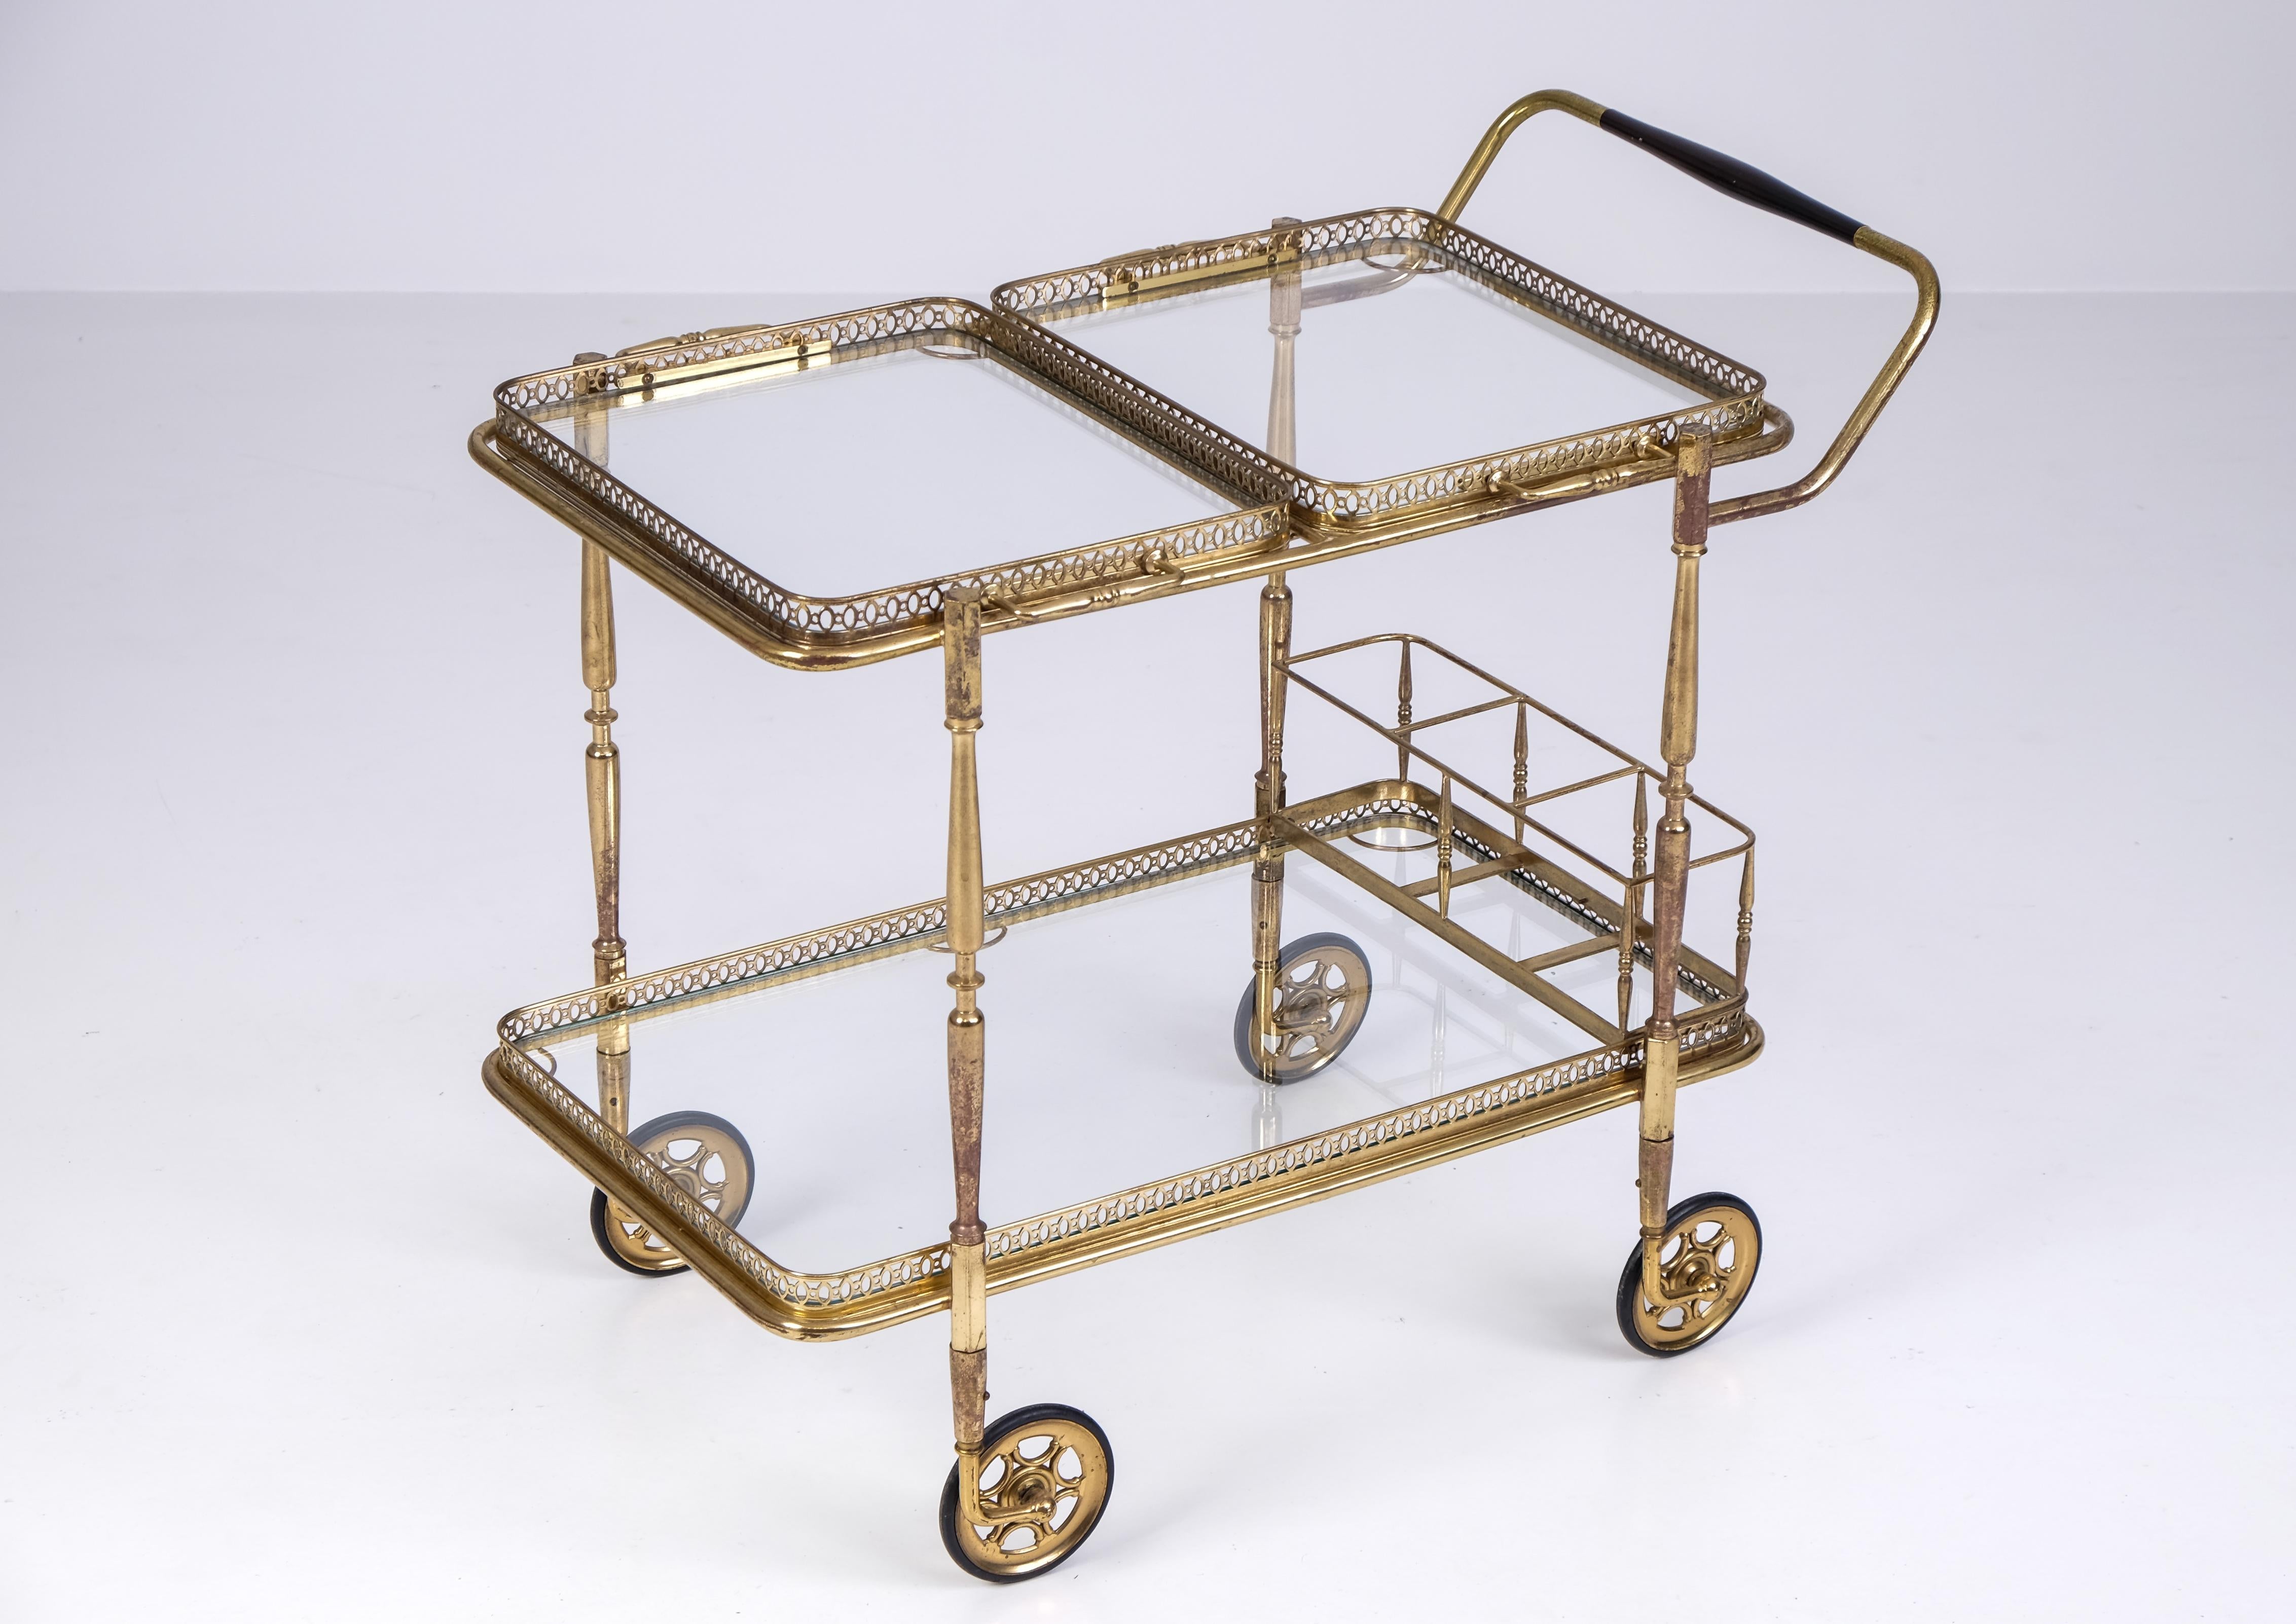 Midcentury Brass & Glass Bar Cart, 1960s For Sale 4